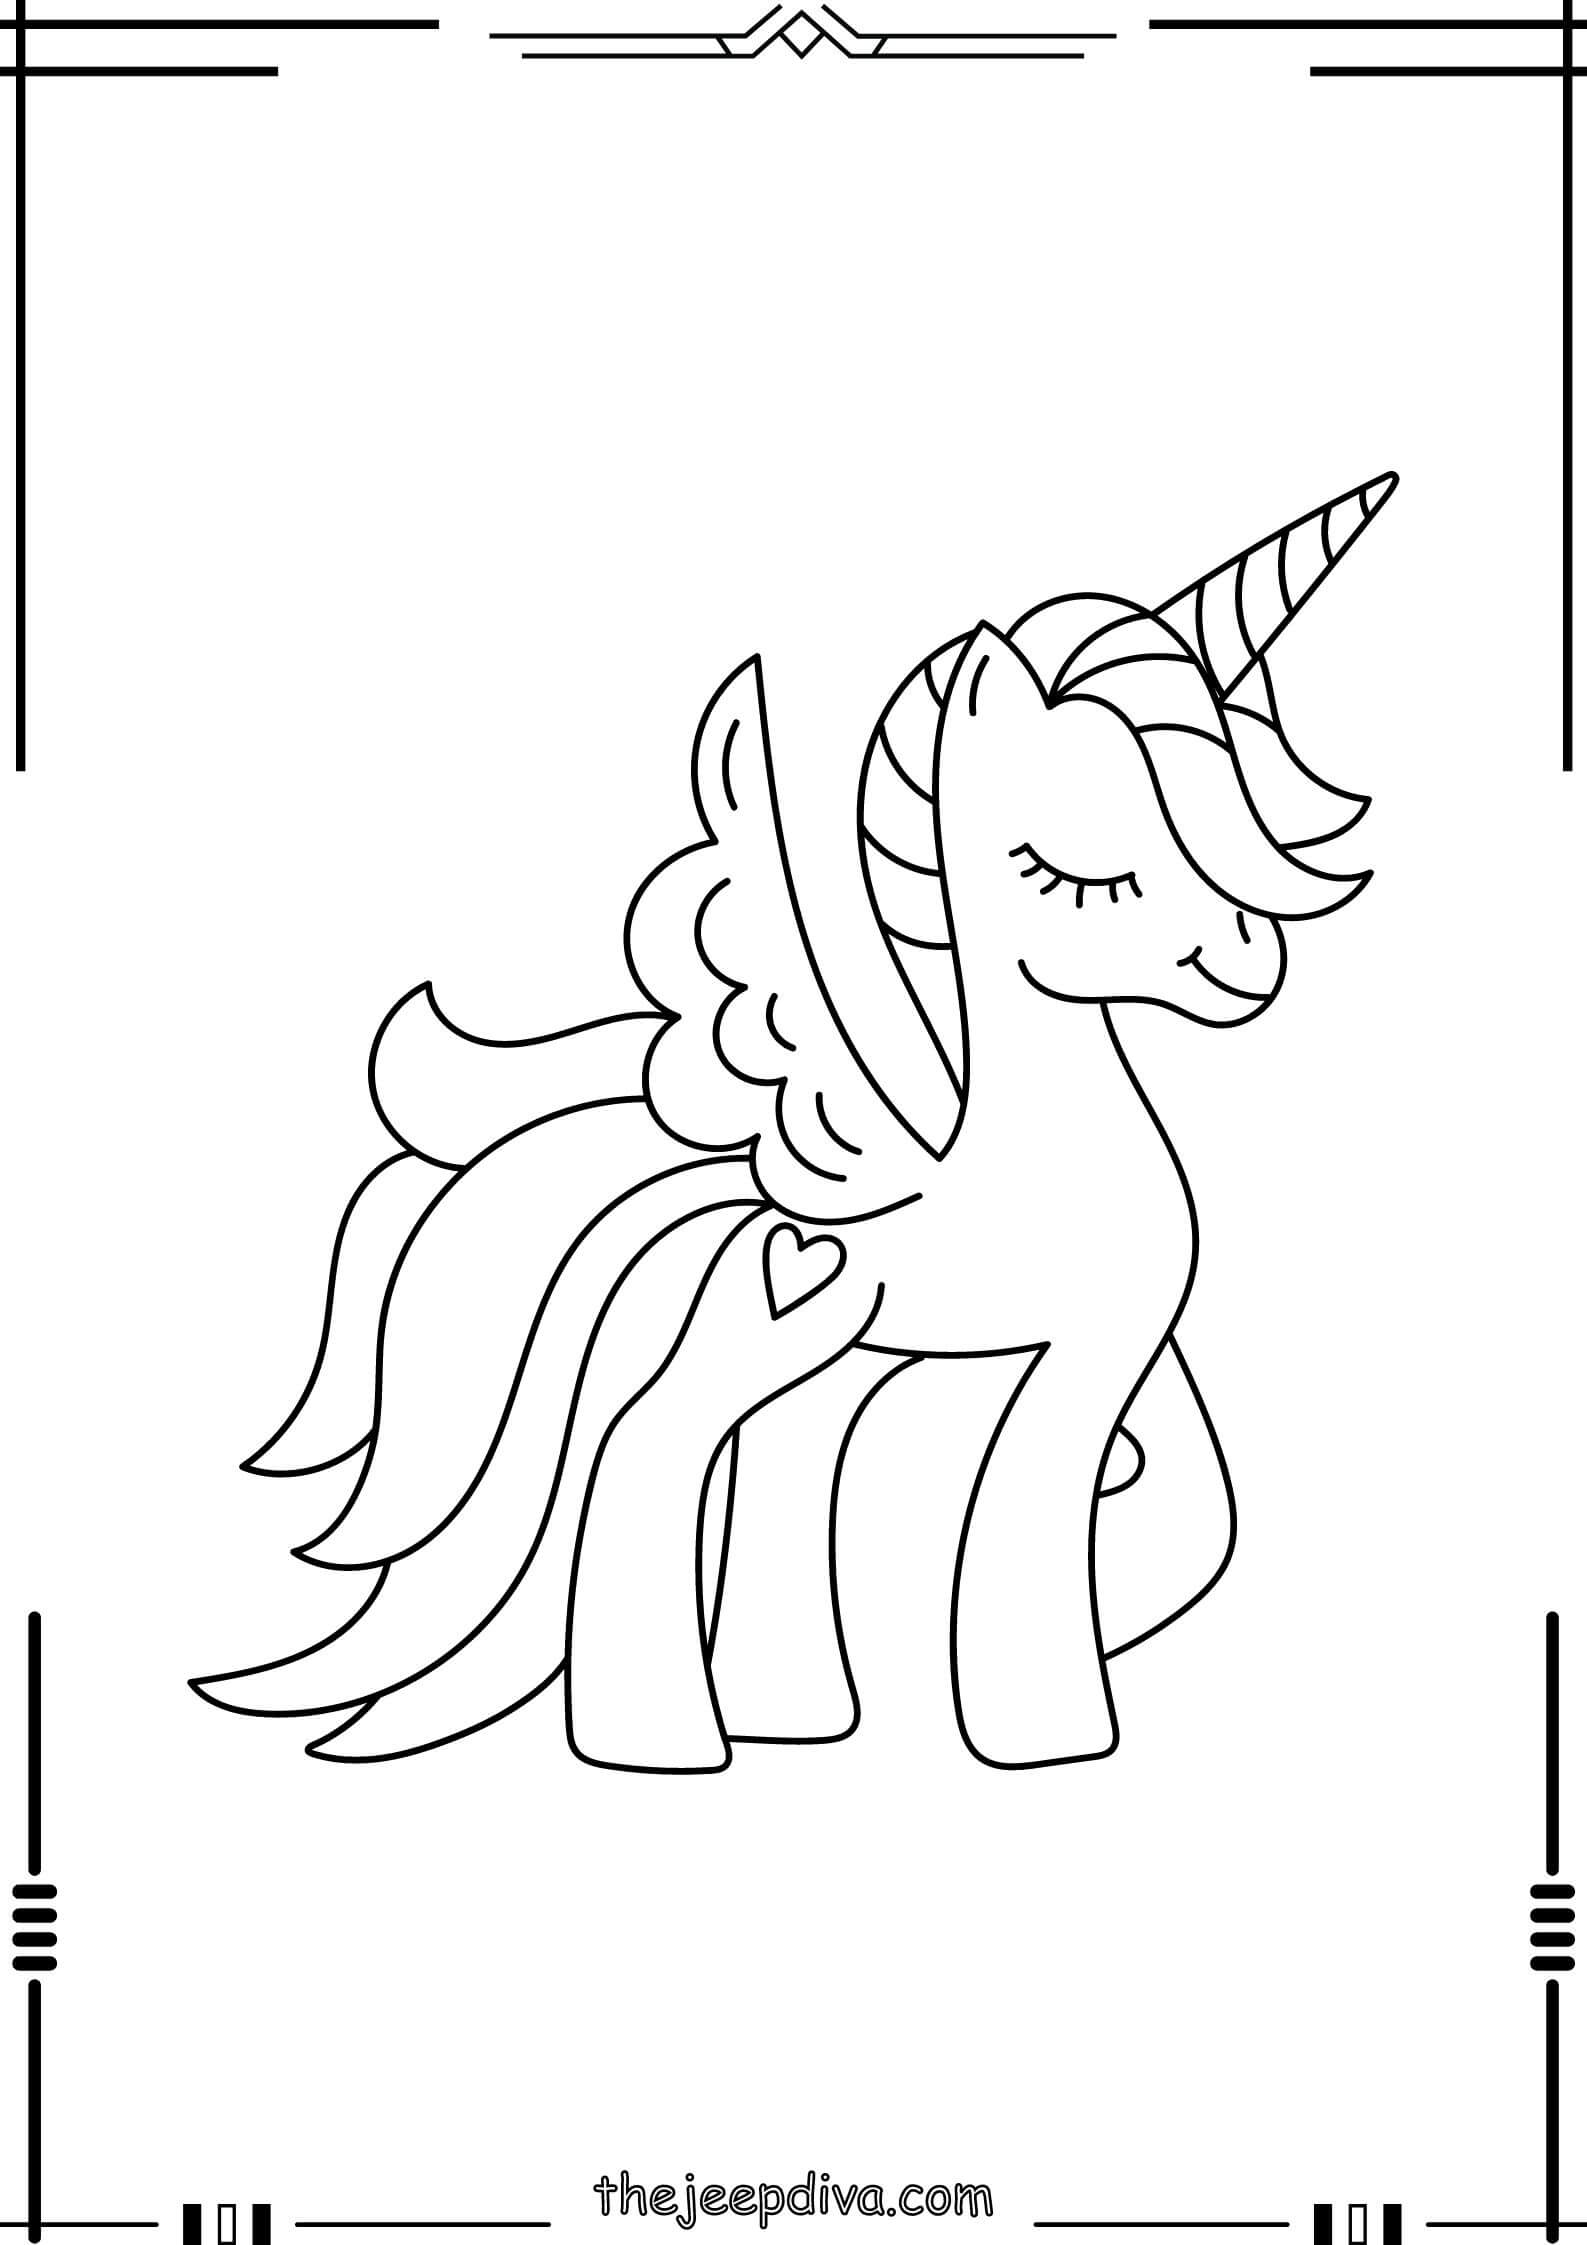 unicorn-coloring-page-easy-9